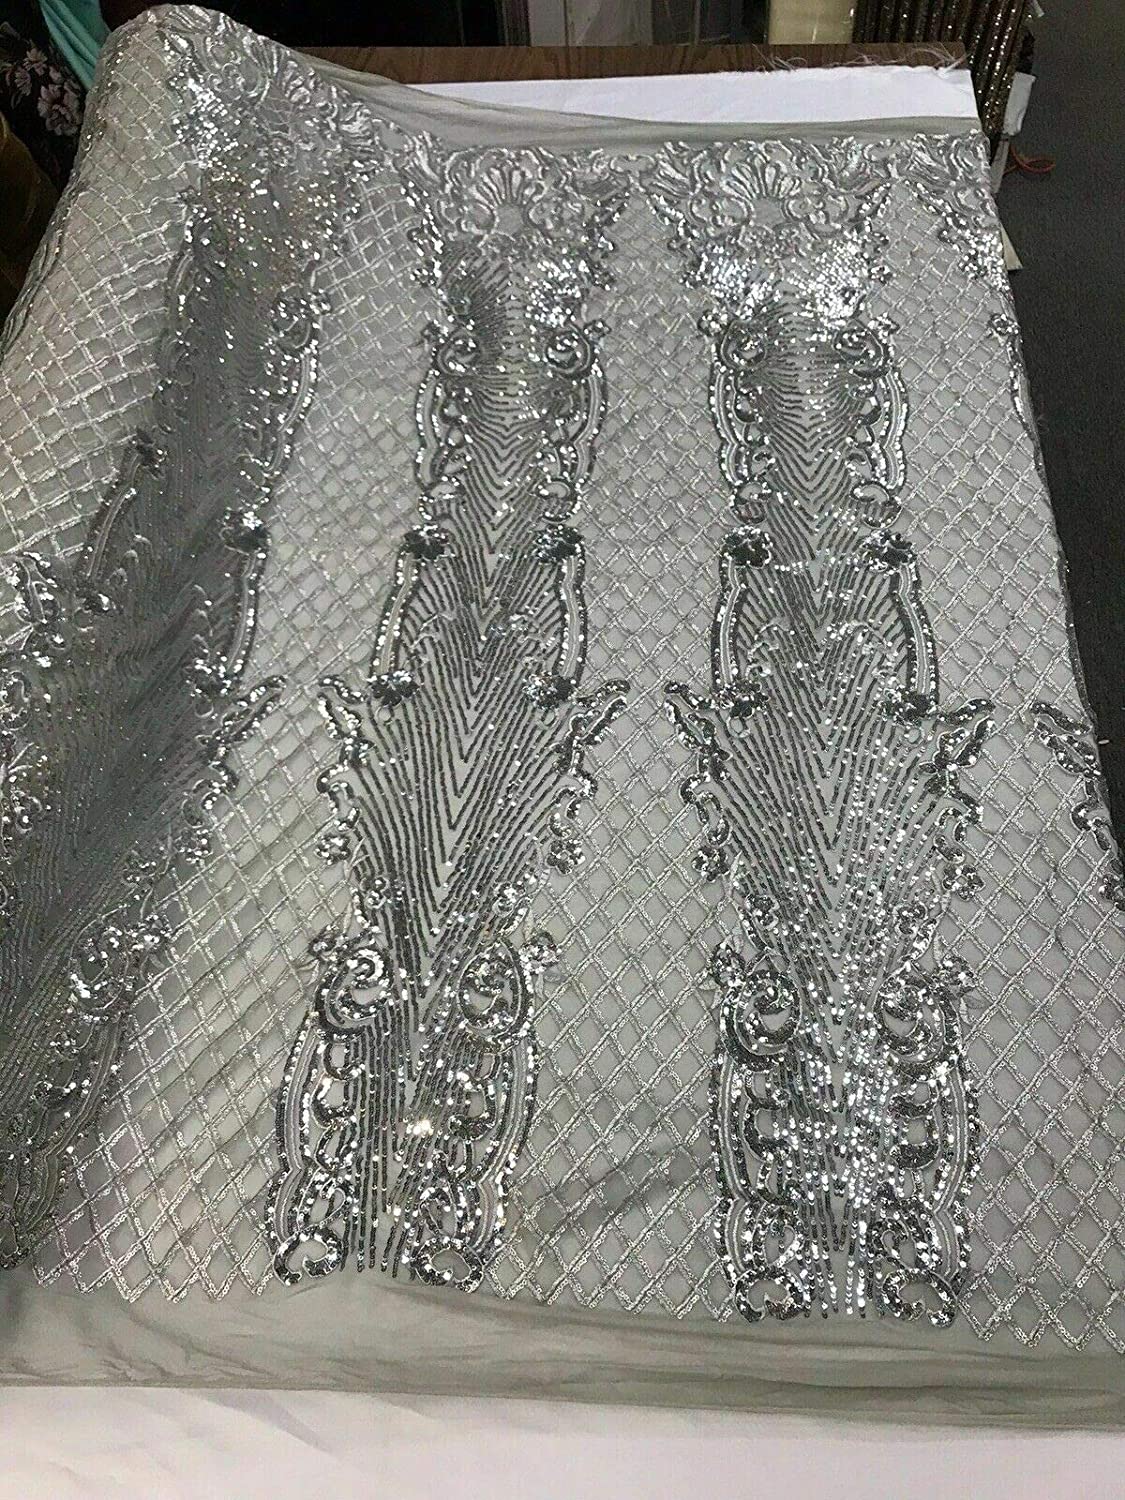 SHINY GLITTER SEQUIN DAMASK DESIGN EMBROIDERY ON A 4 WAY STRETCH MESH-BY 1 YARD (By the Yard GLITTER SEQUIN SILVER/GLITTER SEQUINS)